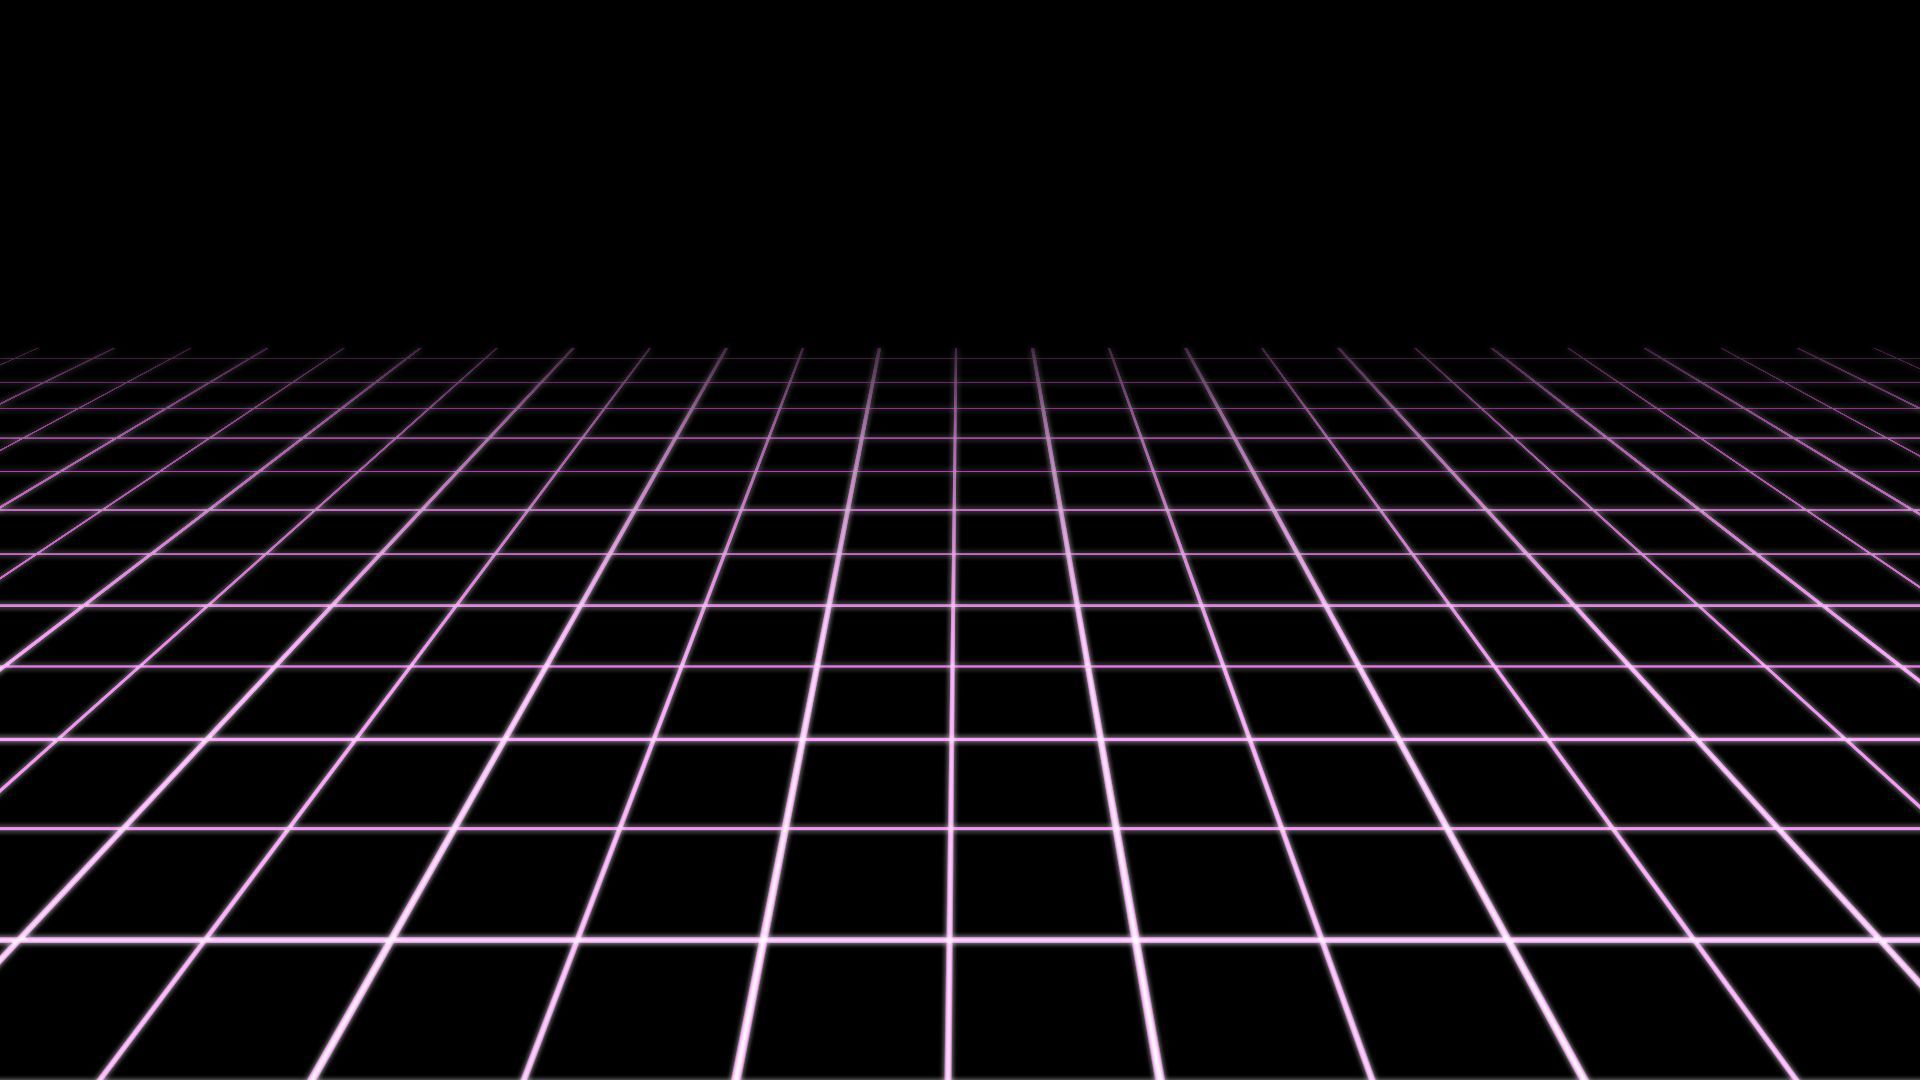 A black background with a purple grid - Grid